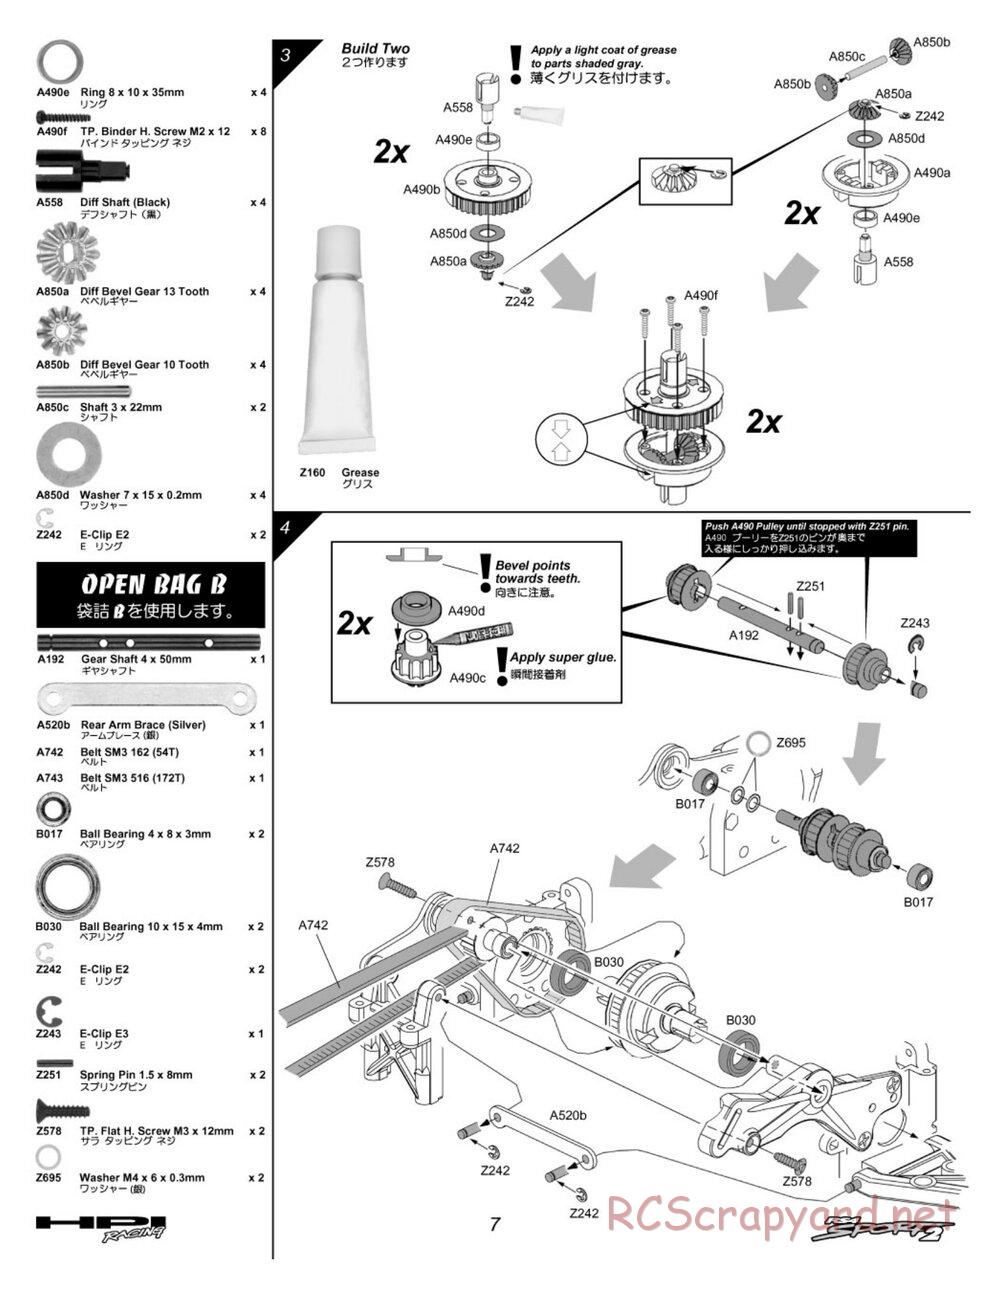 HPI - RS4 Sport 2 - Manual - Page 7